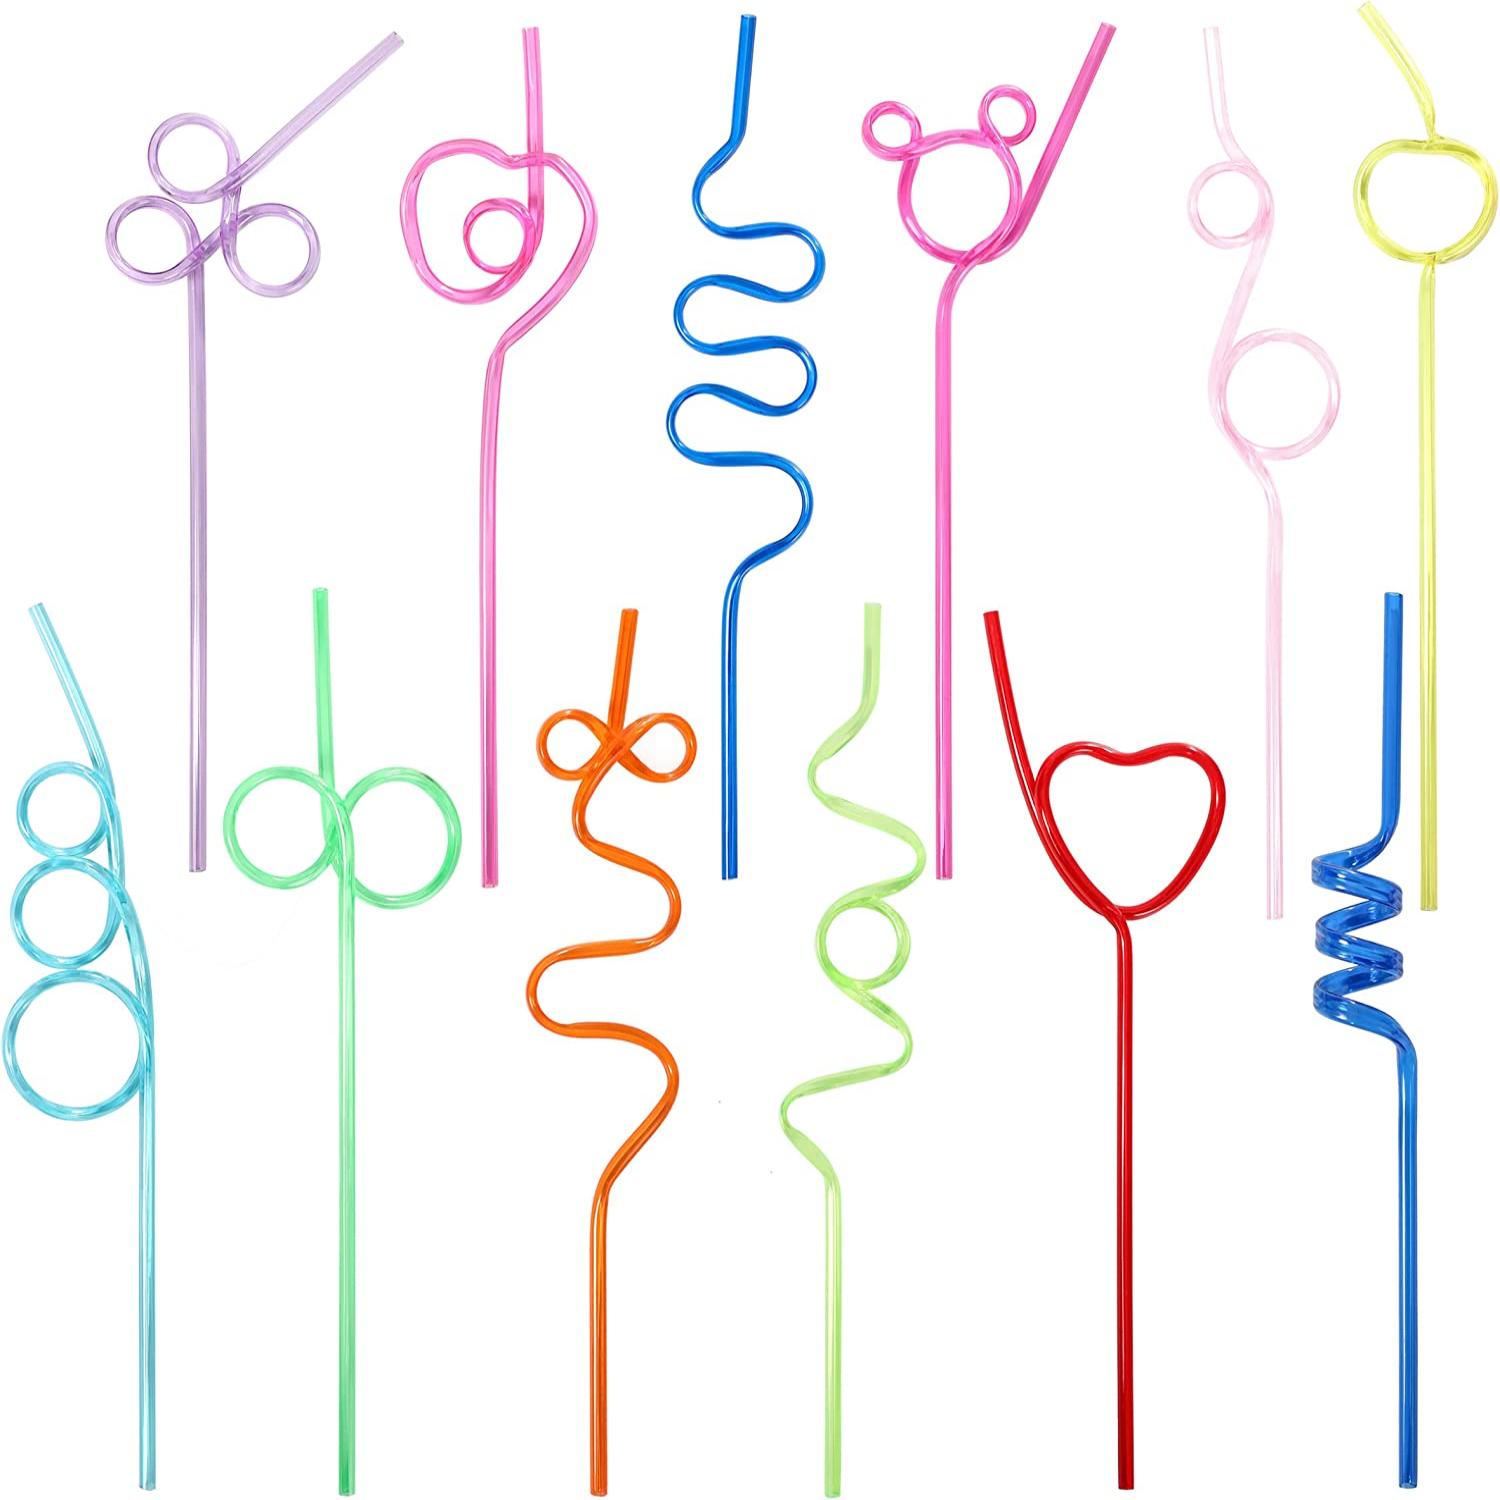 24pcs Straw, Mermaid Straw With Brush, Reusable Straw For Milk Water  Drinking, Straws For Family Gatherings, Birthday Parties, Themed Parties,  Decorat